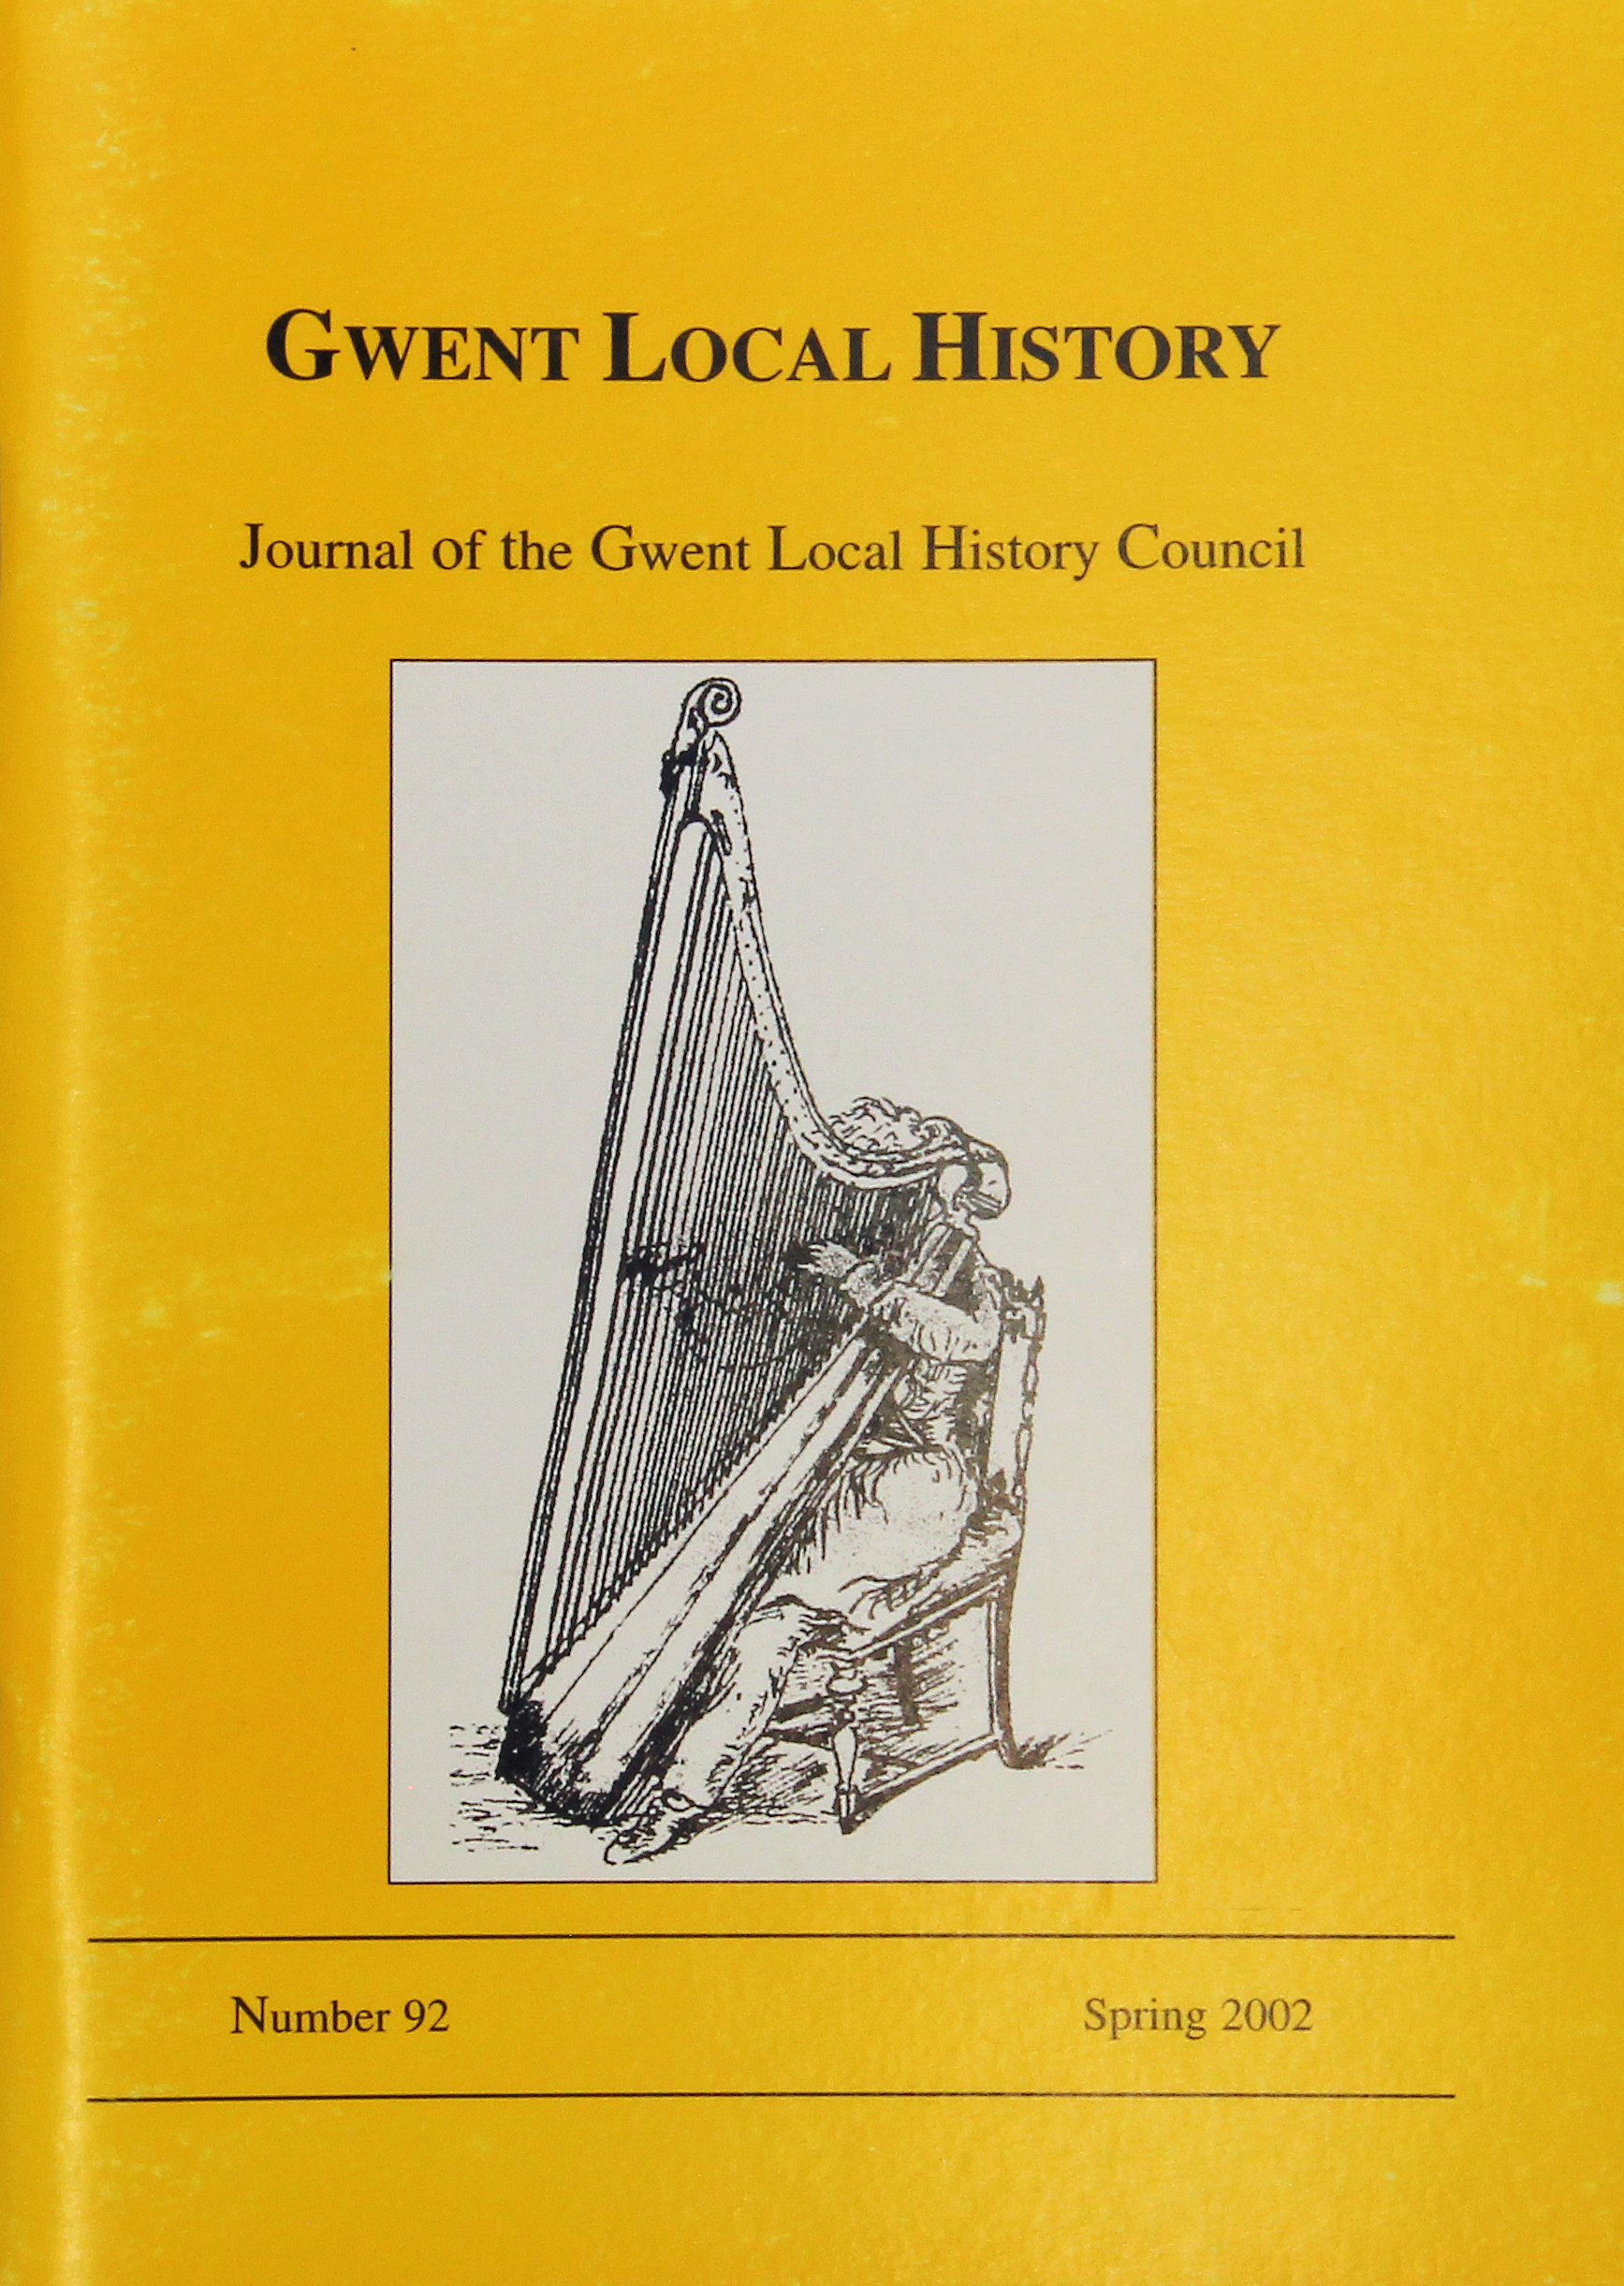 Gwent Local History: Journal of the Gwent Local History Council No.92, Spring 2002, £2.00